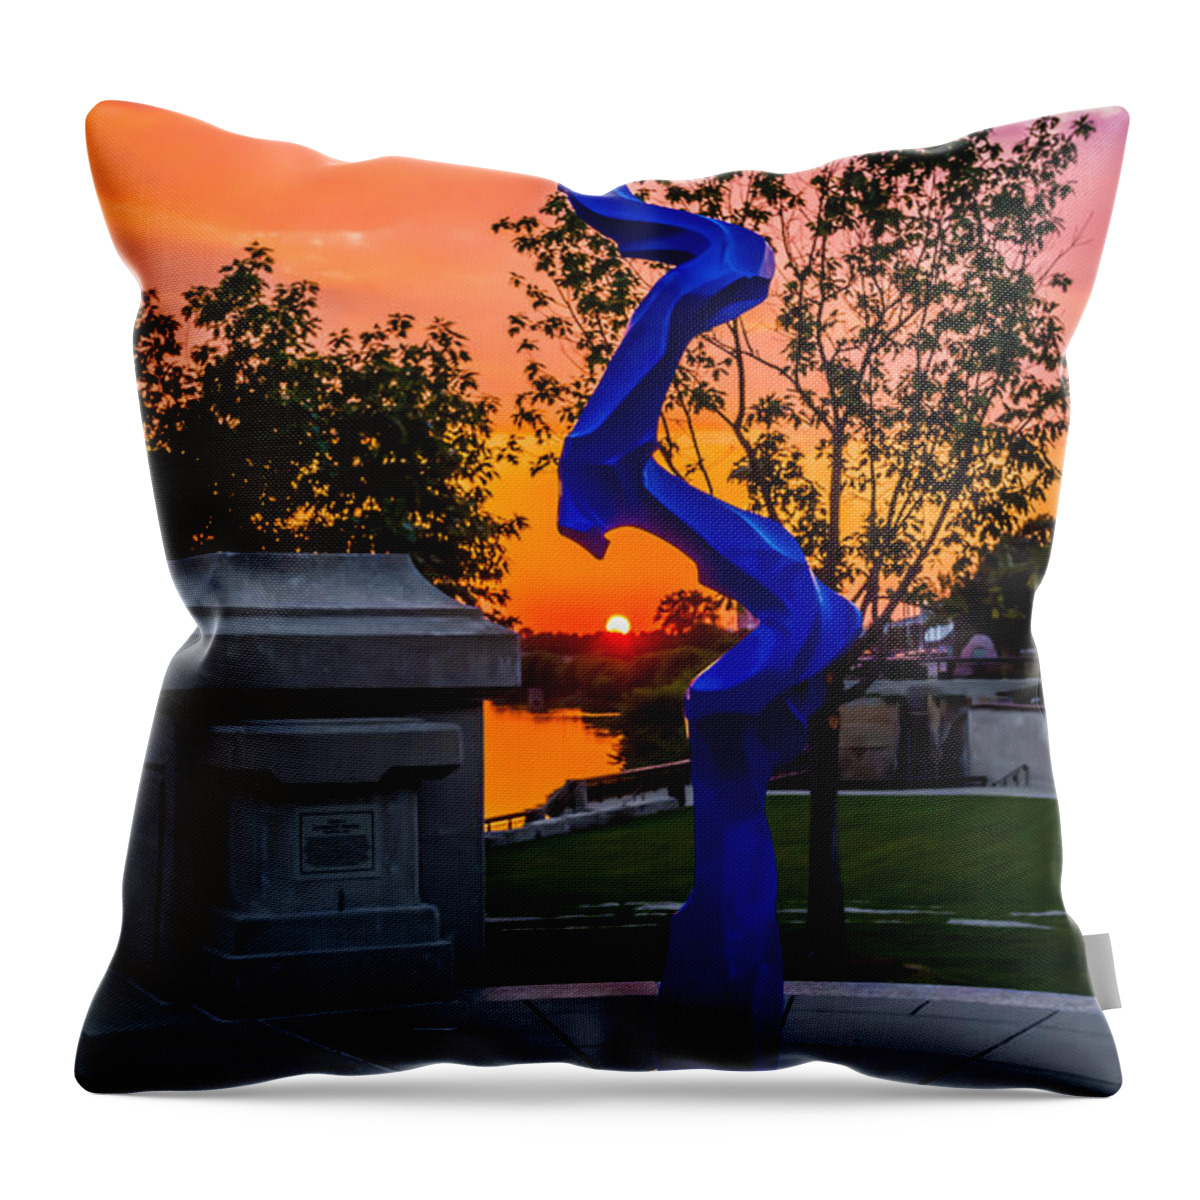 Sunset Throw Pillow featuring the photograph Sunset Sculpture by Ron Pate